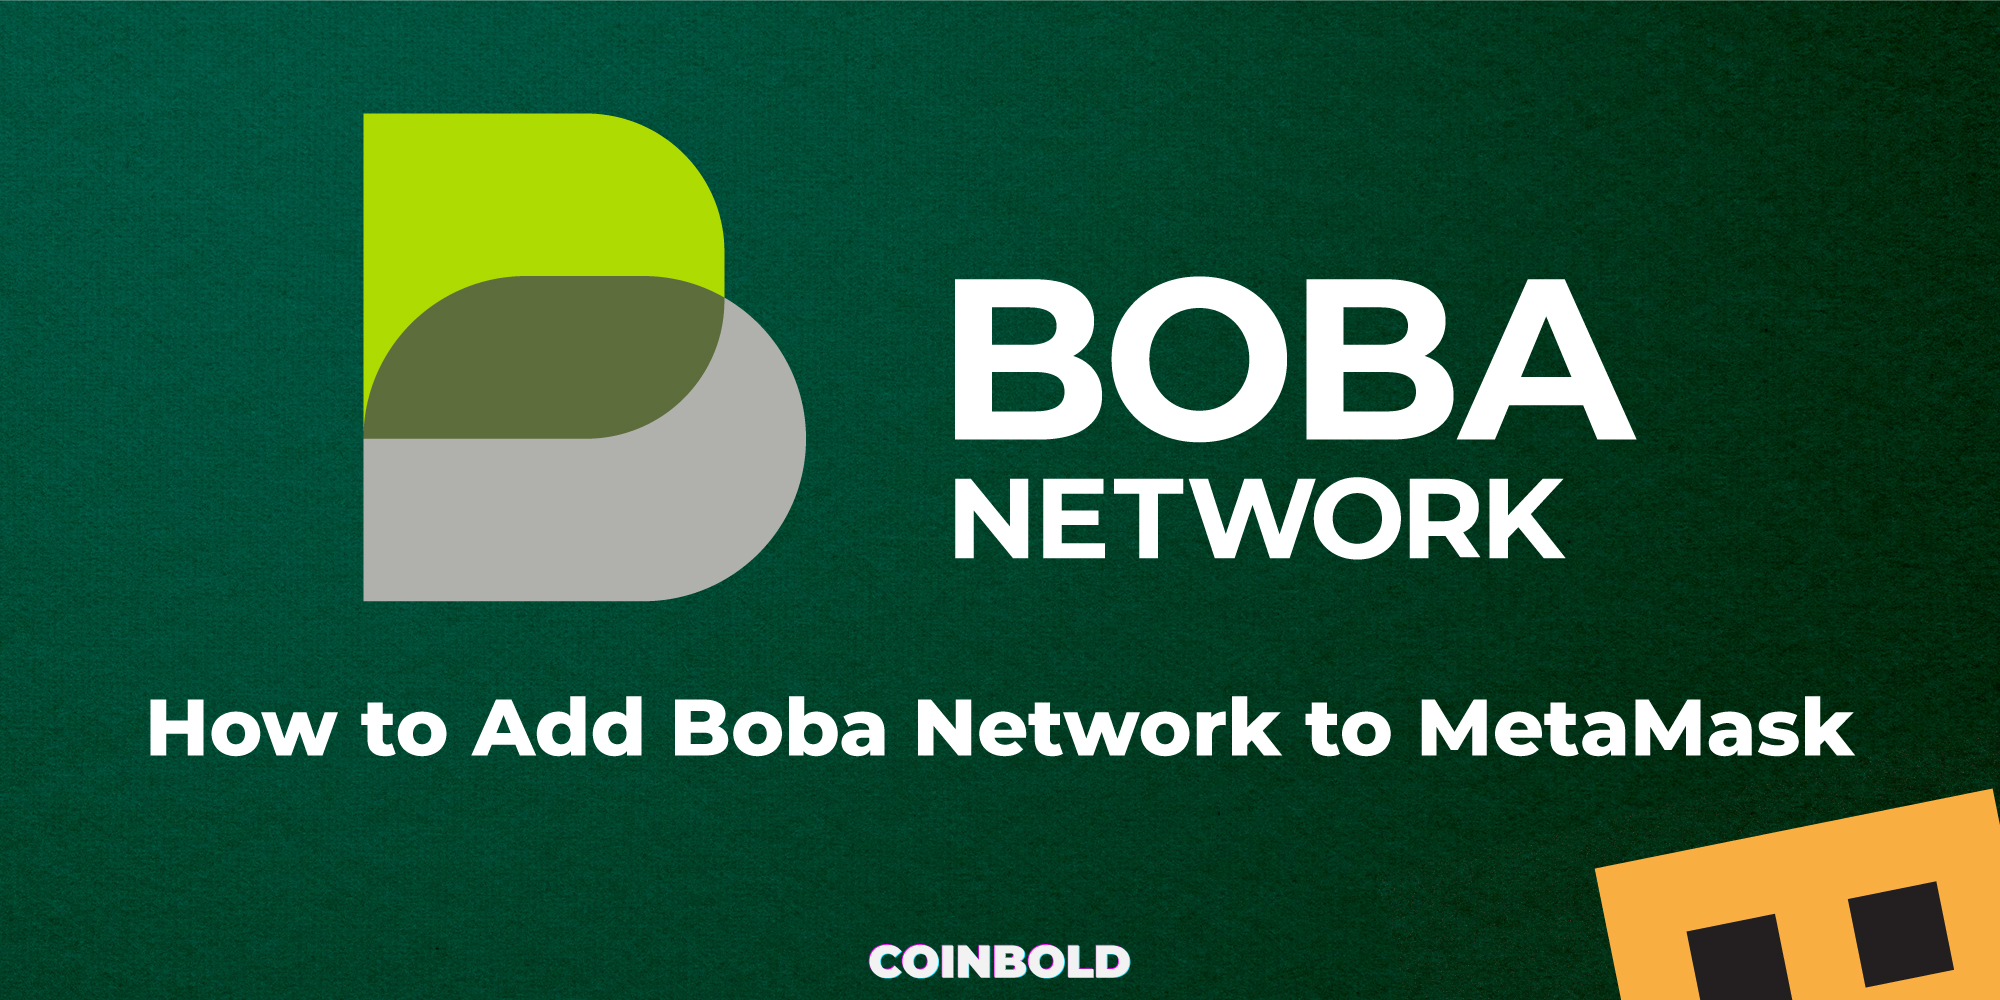 How to Add Boba Network to MetaMask